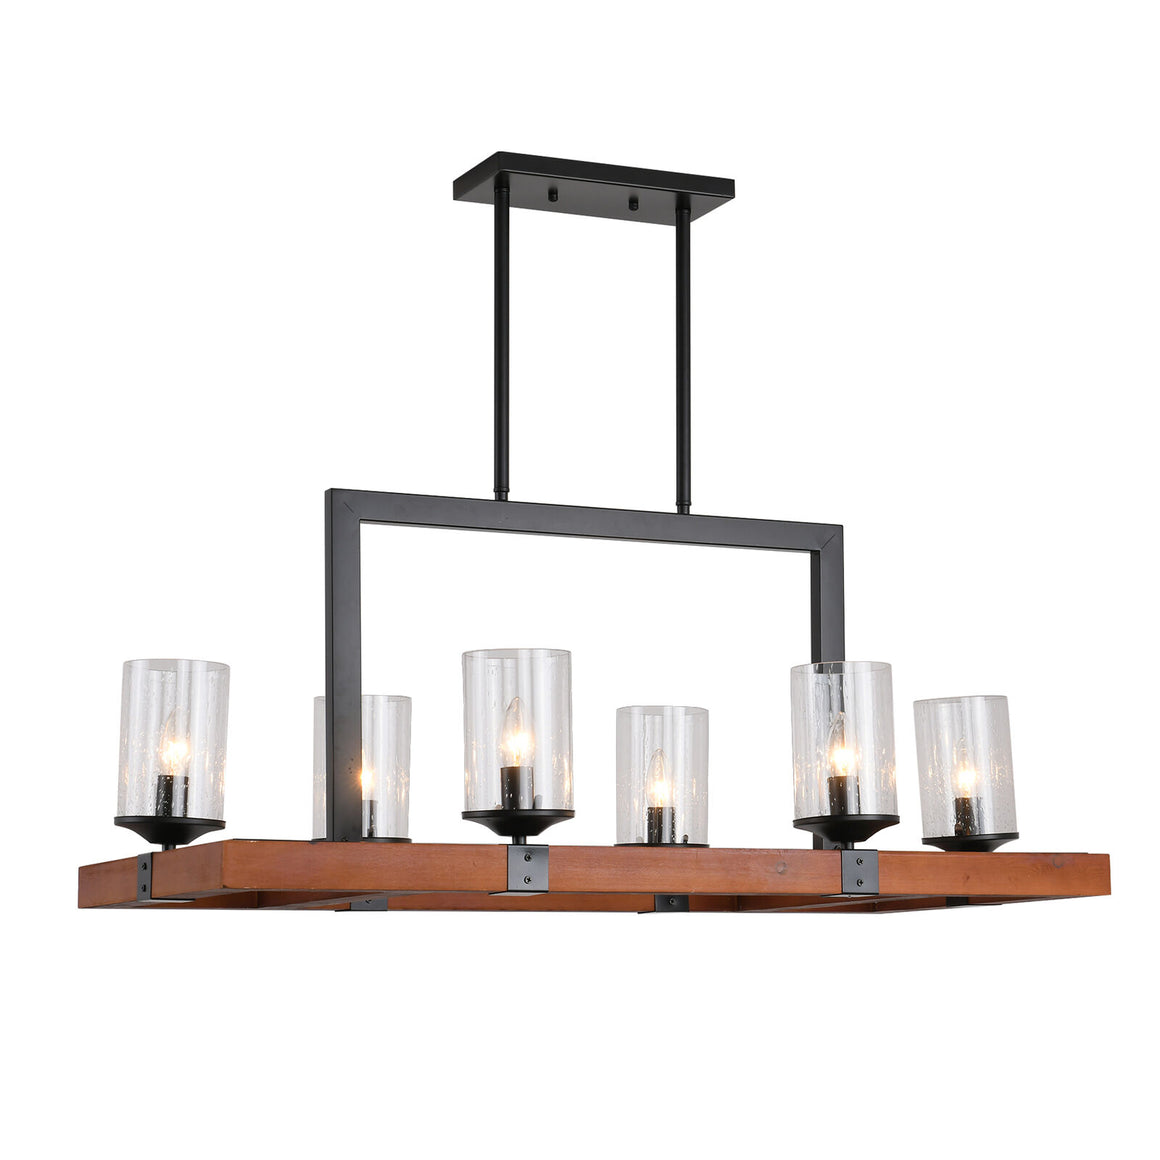 River Quinn 6 Light Industrial Pendant in Iron and Wood